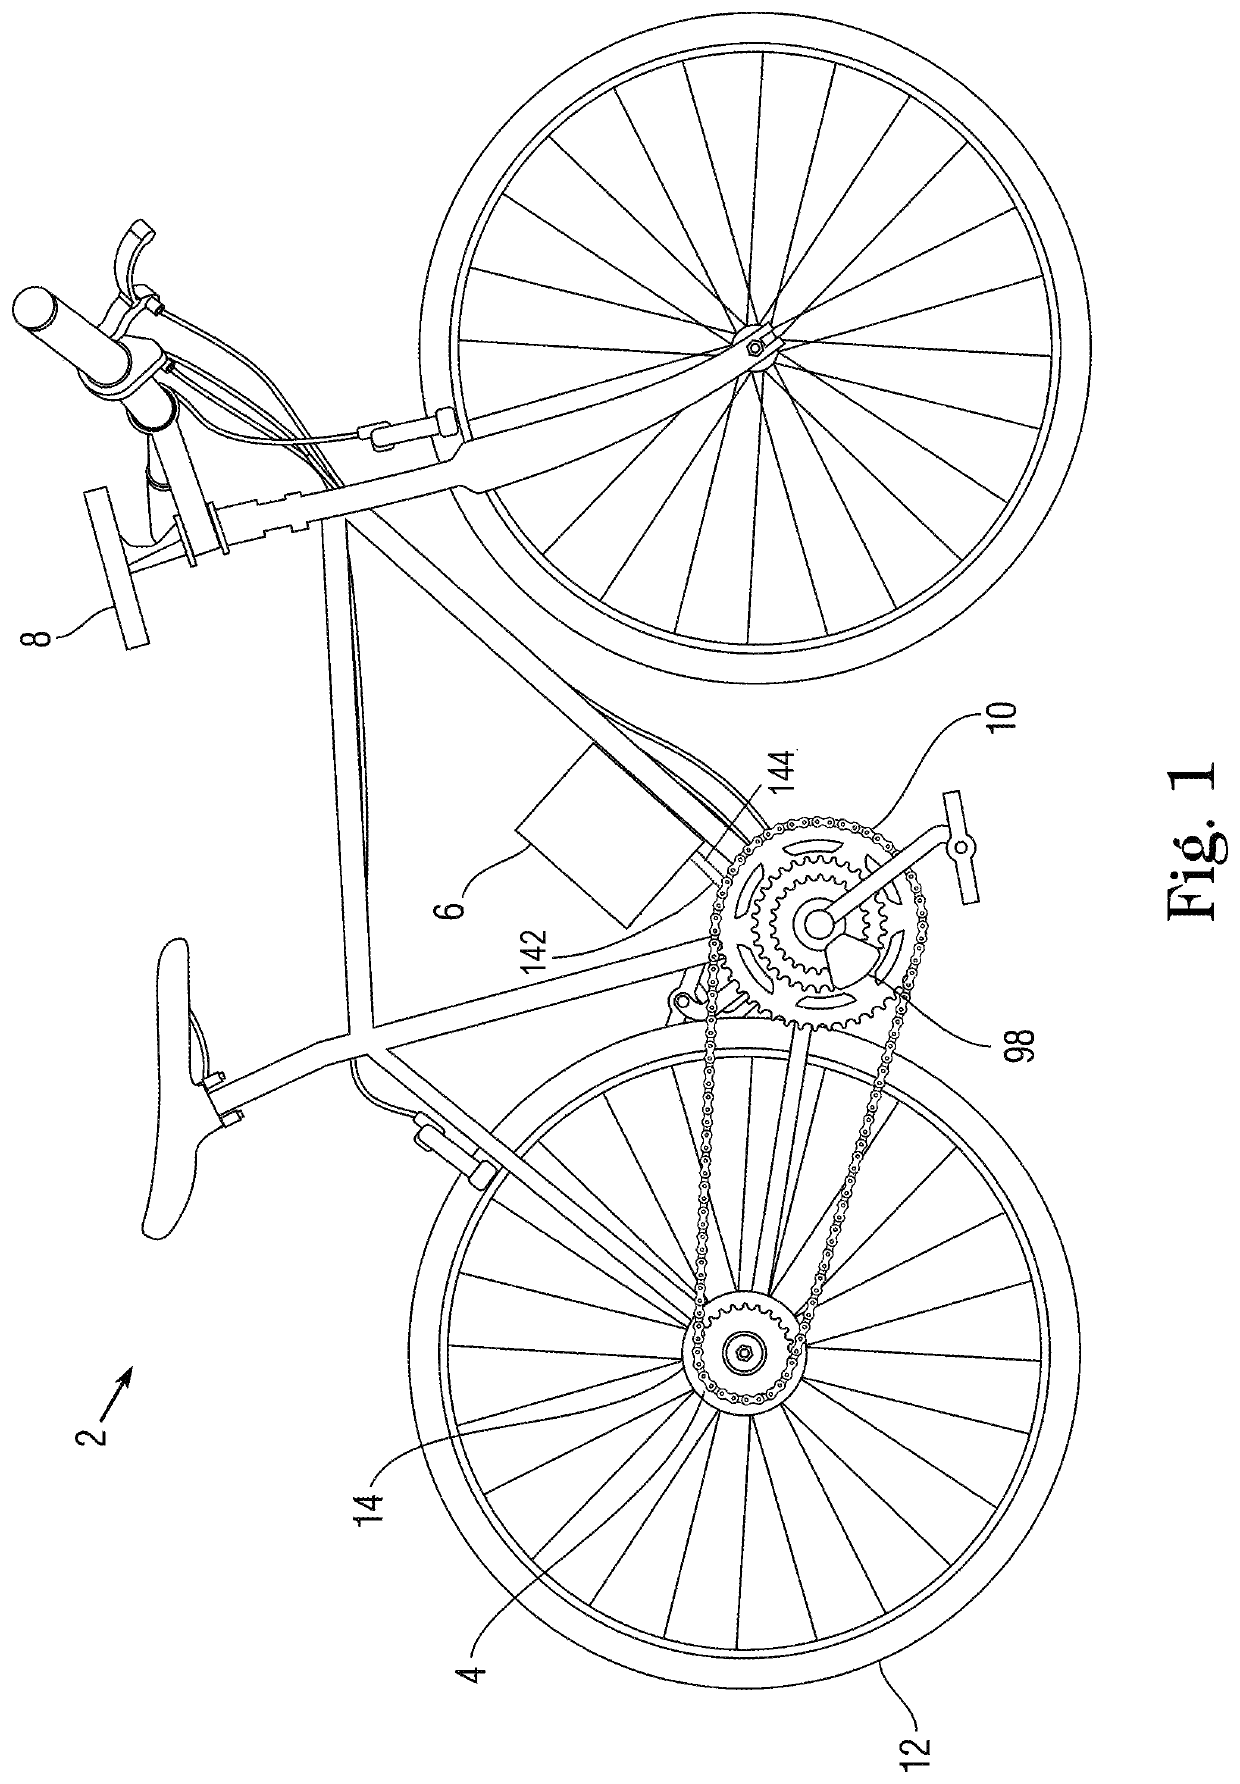 Self-shifting bicycle that shifts as a function of power output